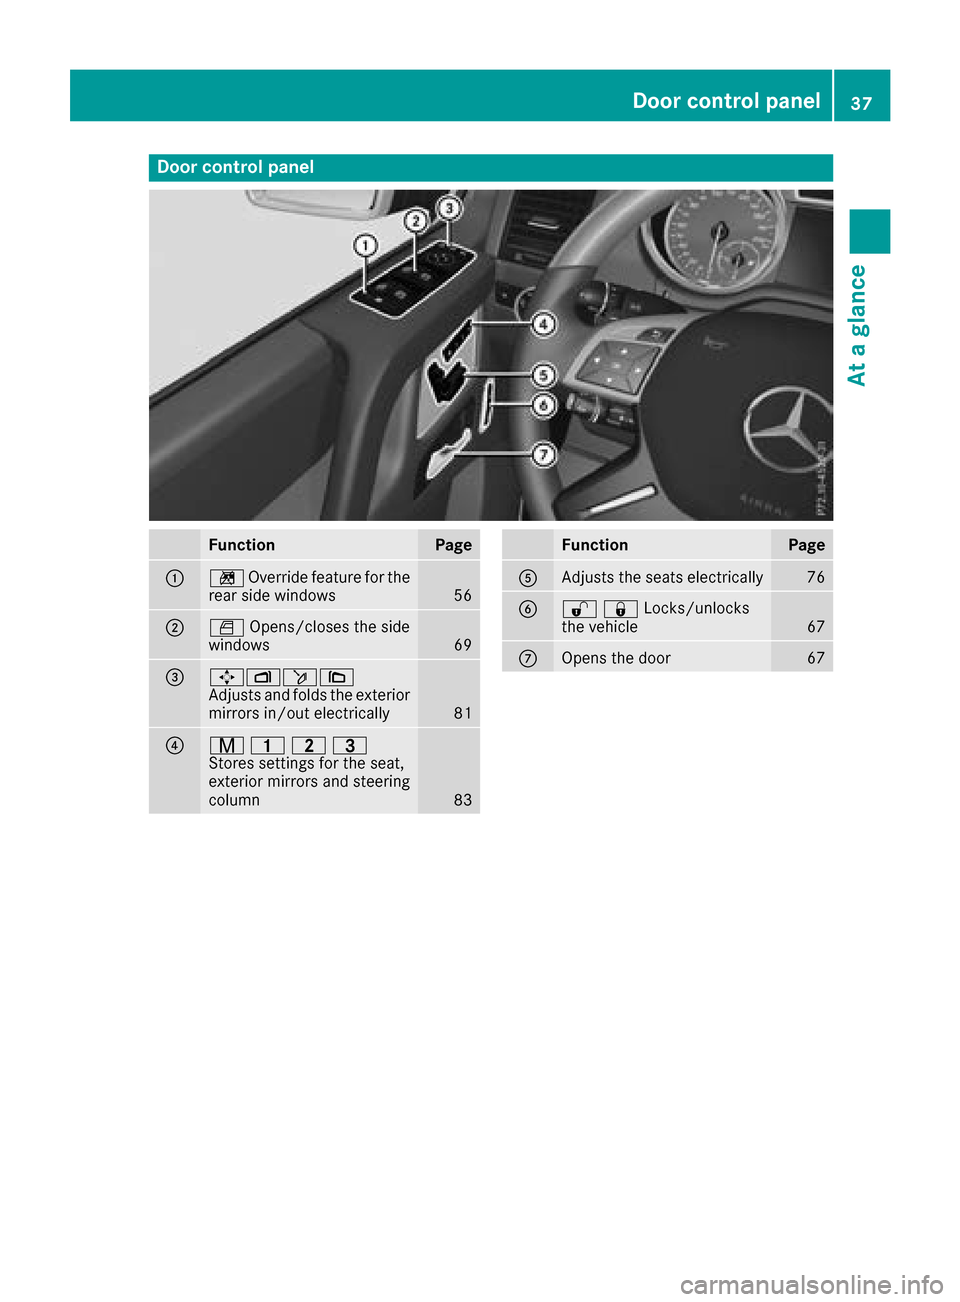 MERCEDES-BENZ G-Class 2017 W463 Owners Manual Door controlpanel
FunctionPage
:n Override feature fo rthe
rea rsidew indows56
;W Opens/closes th eside
windows69
=7Z ö\
Adjust sand folds th eexter ior
mirrors in/out electrically
81
?r 45=
Stores s